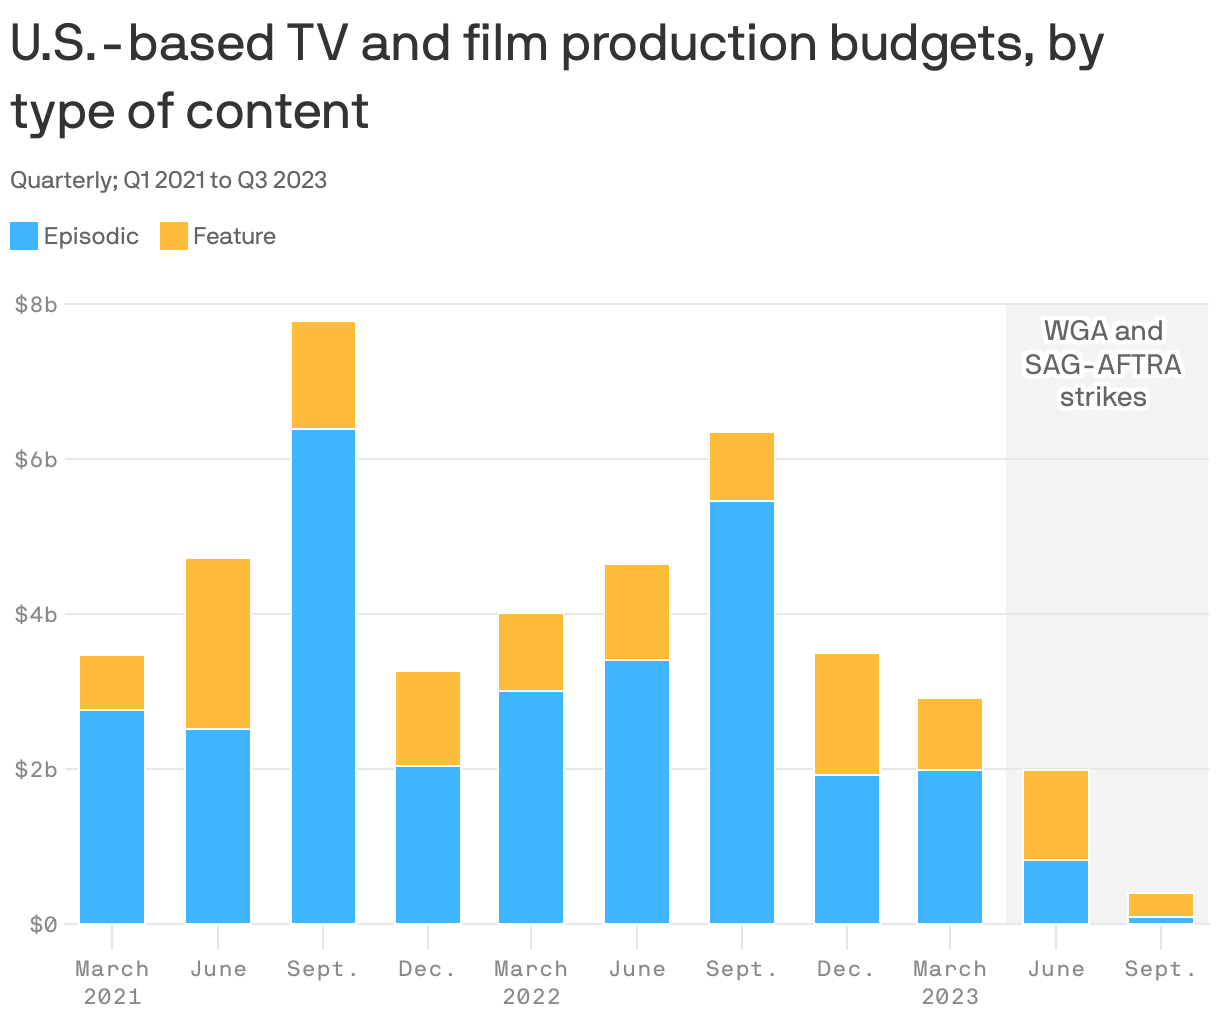 U.S.-based TV and film production budgets, by type of content